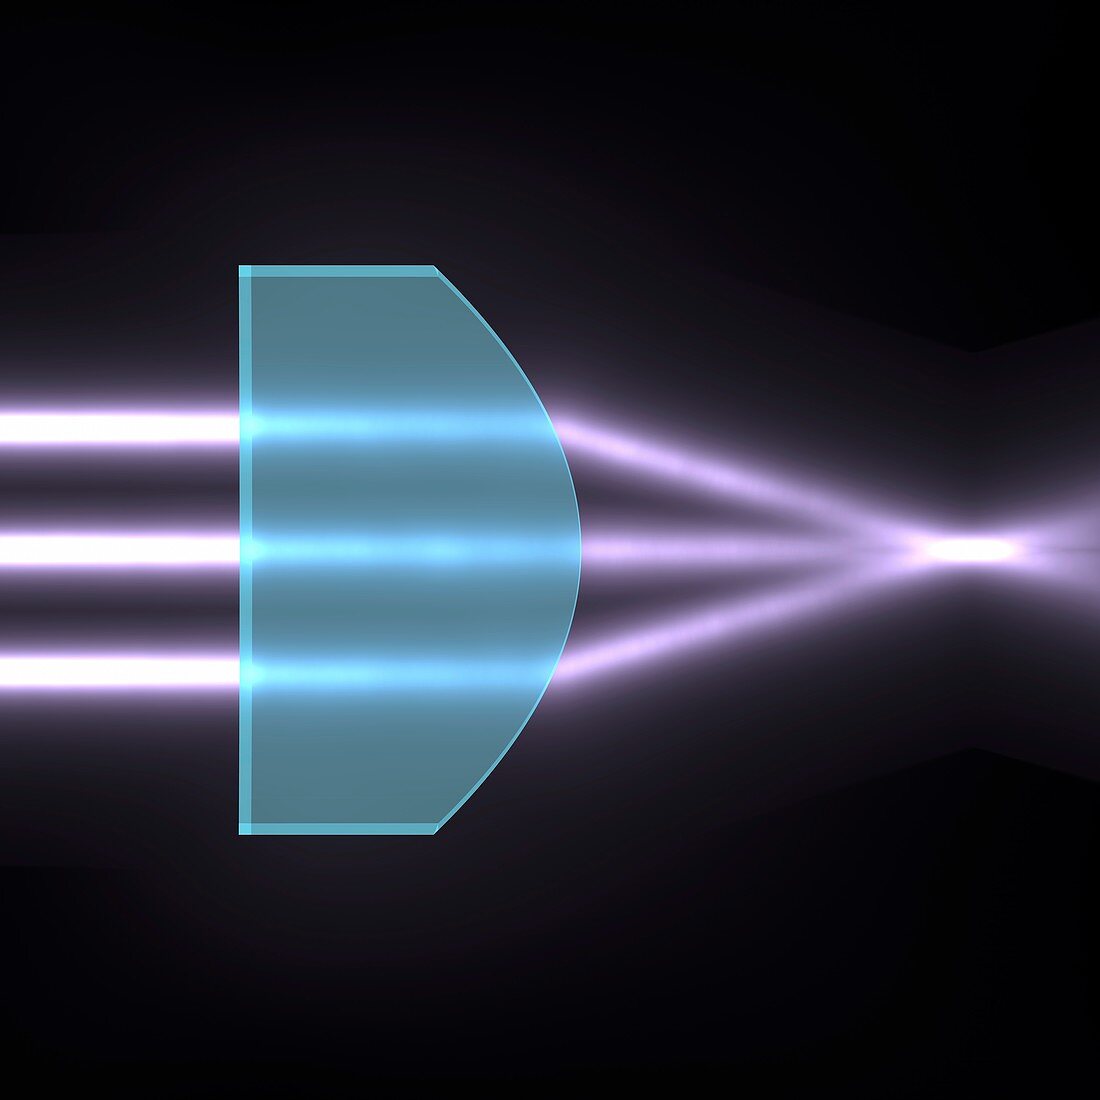 Light refraction with plano-convex lens